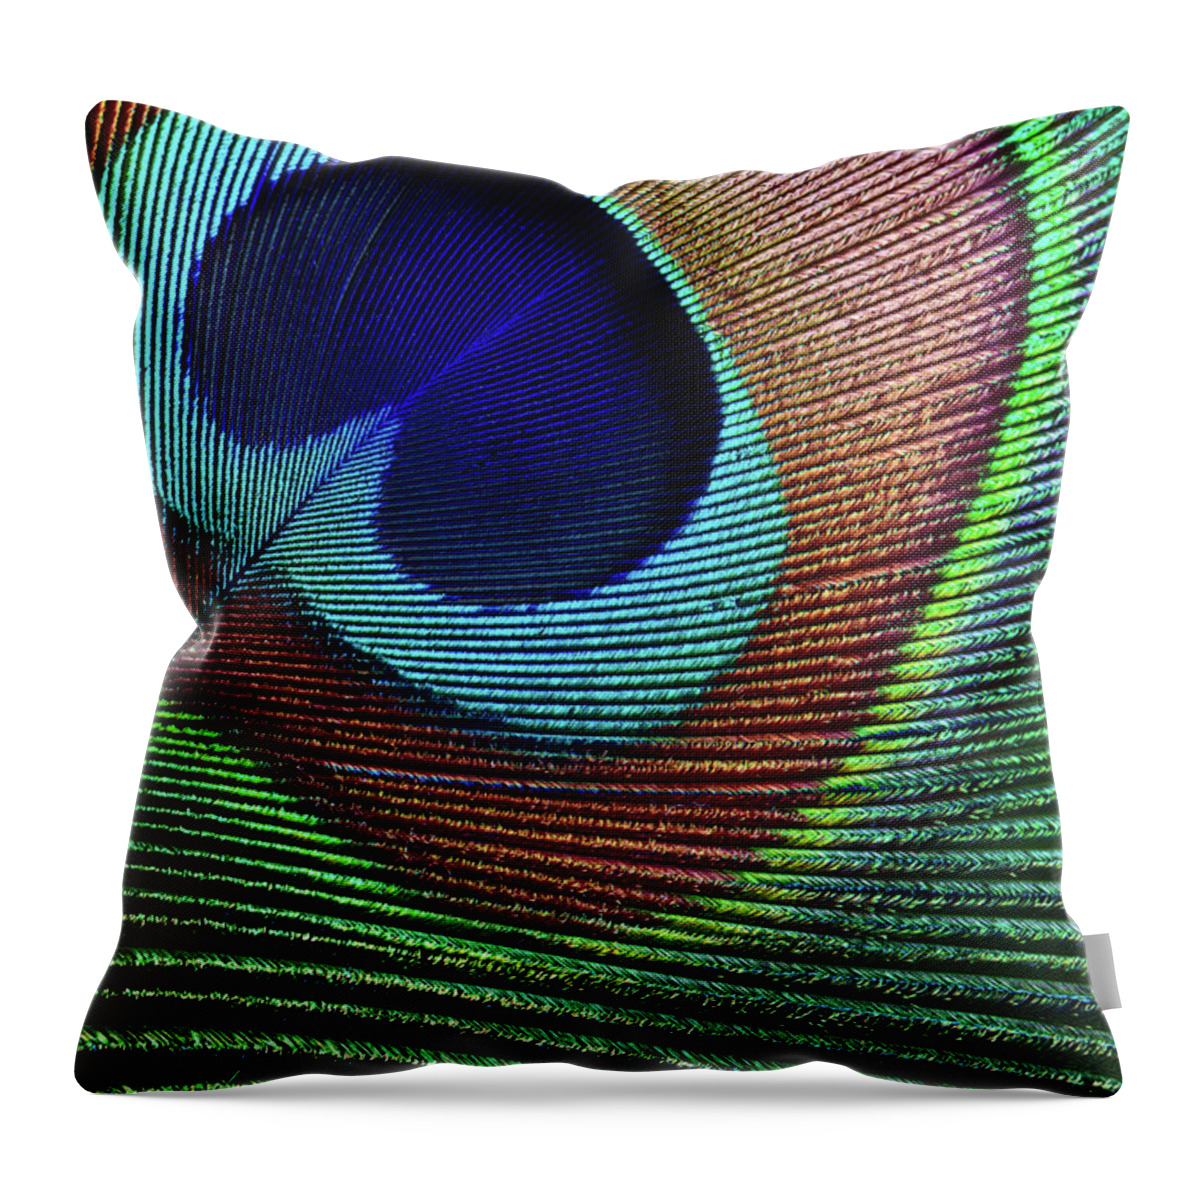 Home Decor Throw Pillow featuring the photograph Peacock Feather by Ithinksky